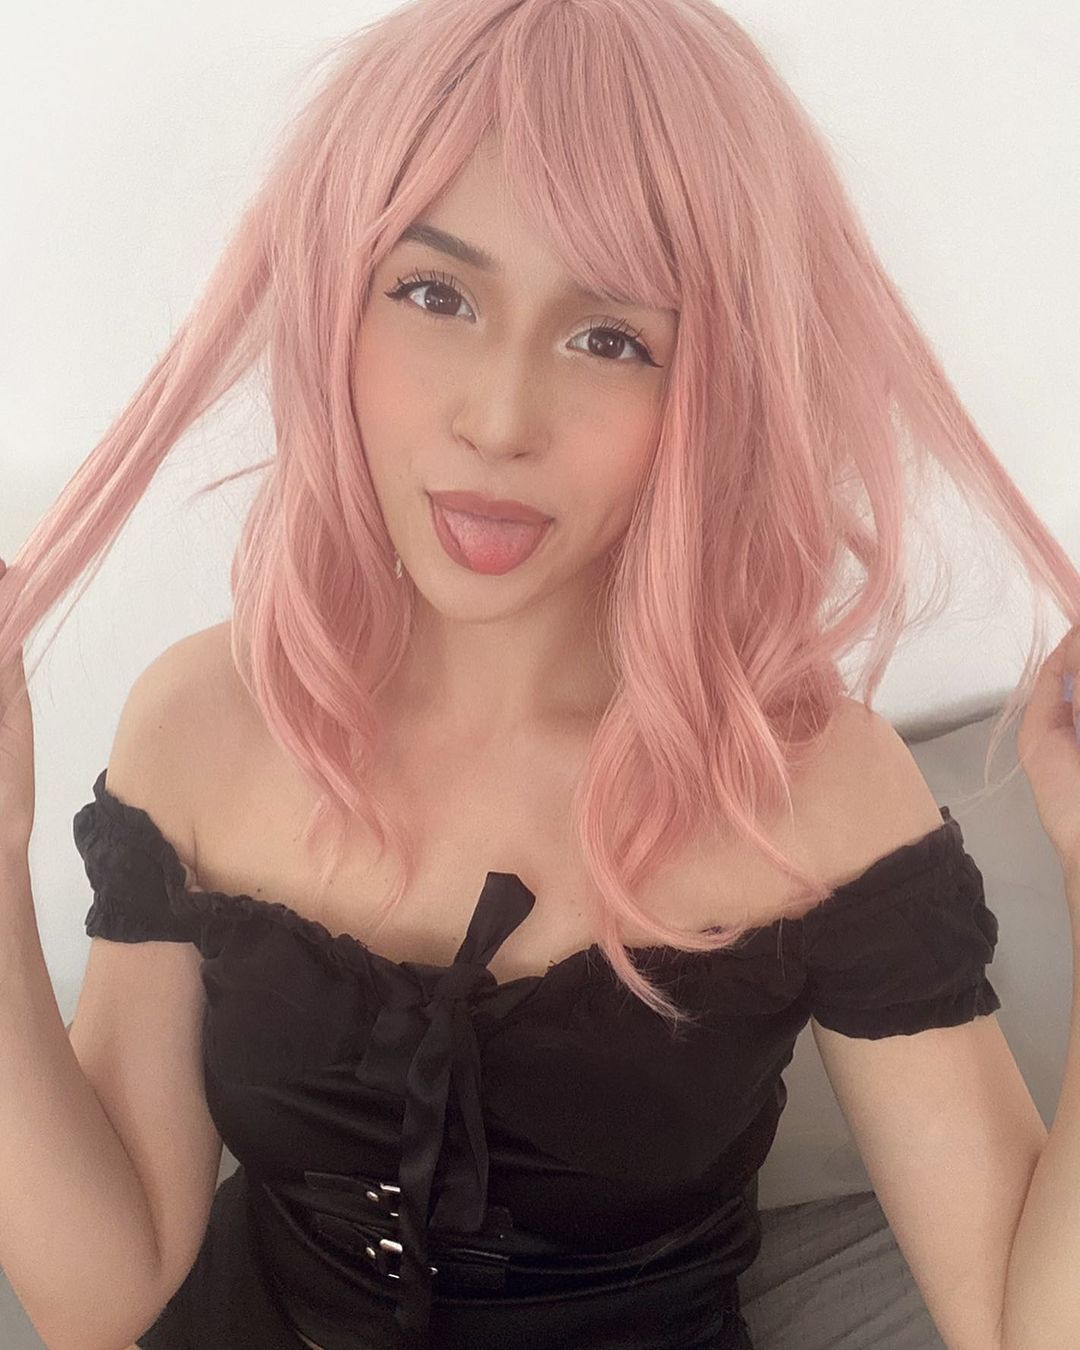 pokimanelol 96139540 2693110257585432 7677151172617357039 n Guide to the E-Girl Aesthetic: The Vibe You’ll Only see Online